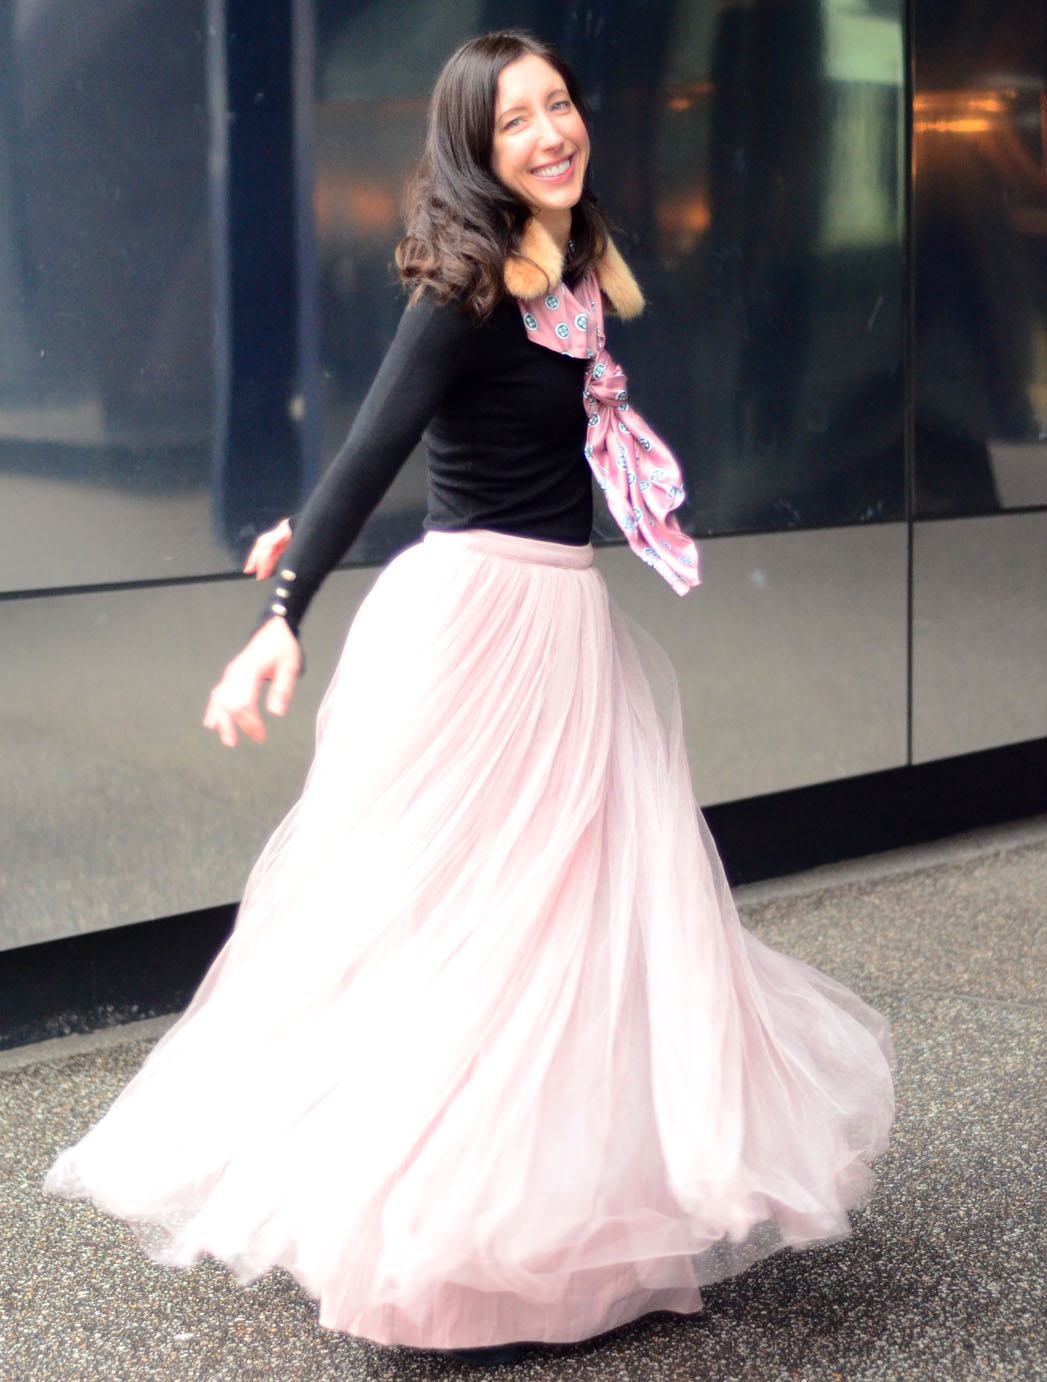 “If I could wear a ball gown to work everyday, I would.”